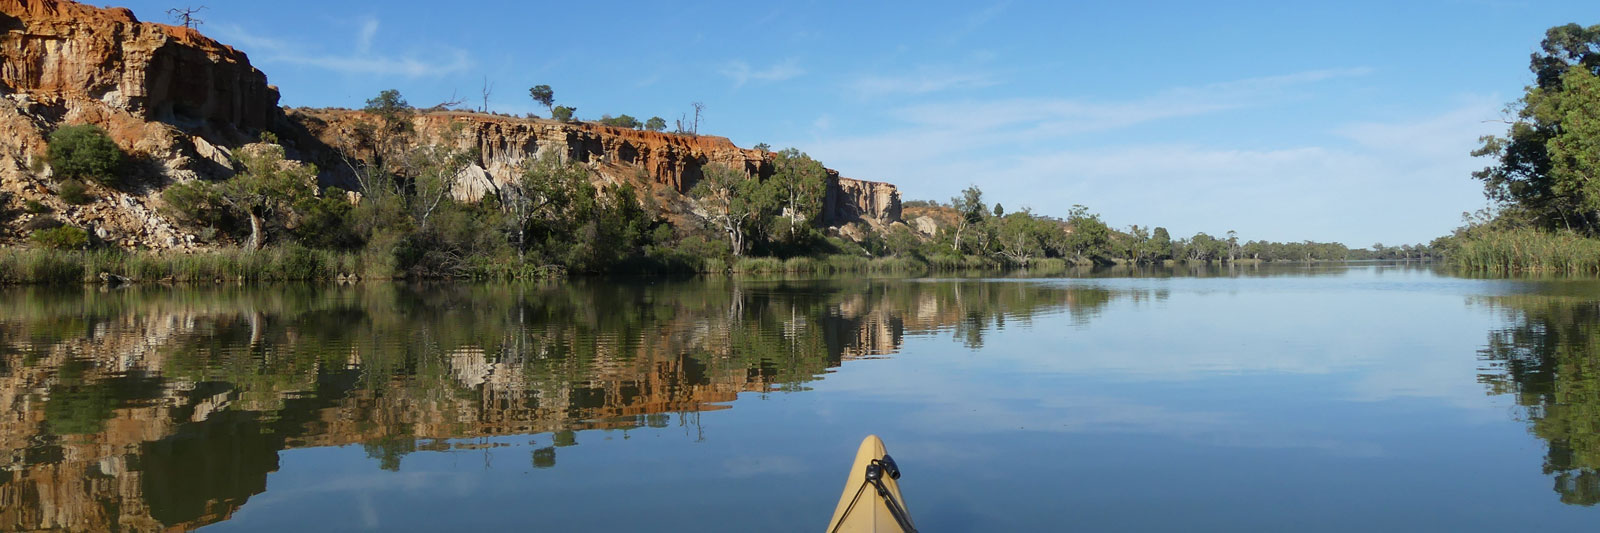 Paddling wide river surrounded by cliffs and trees